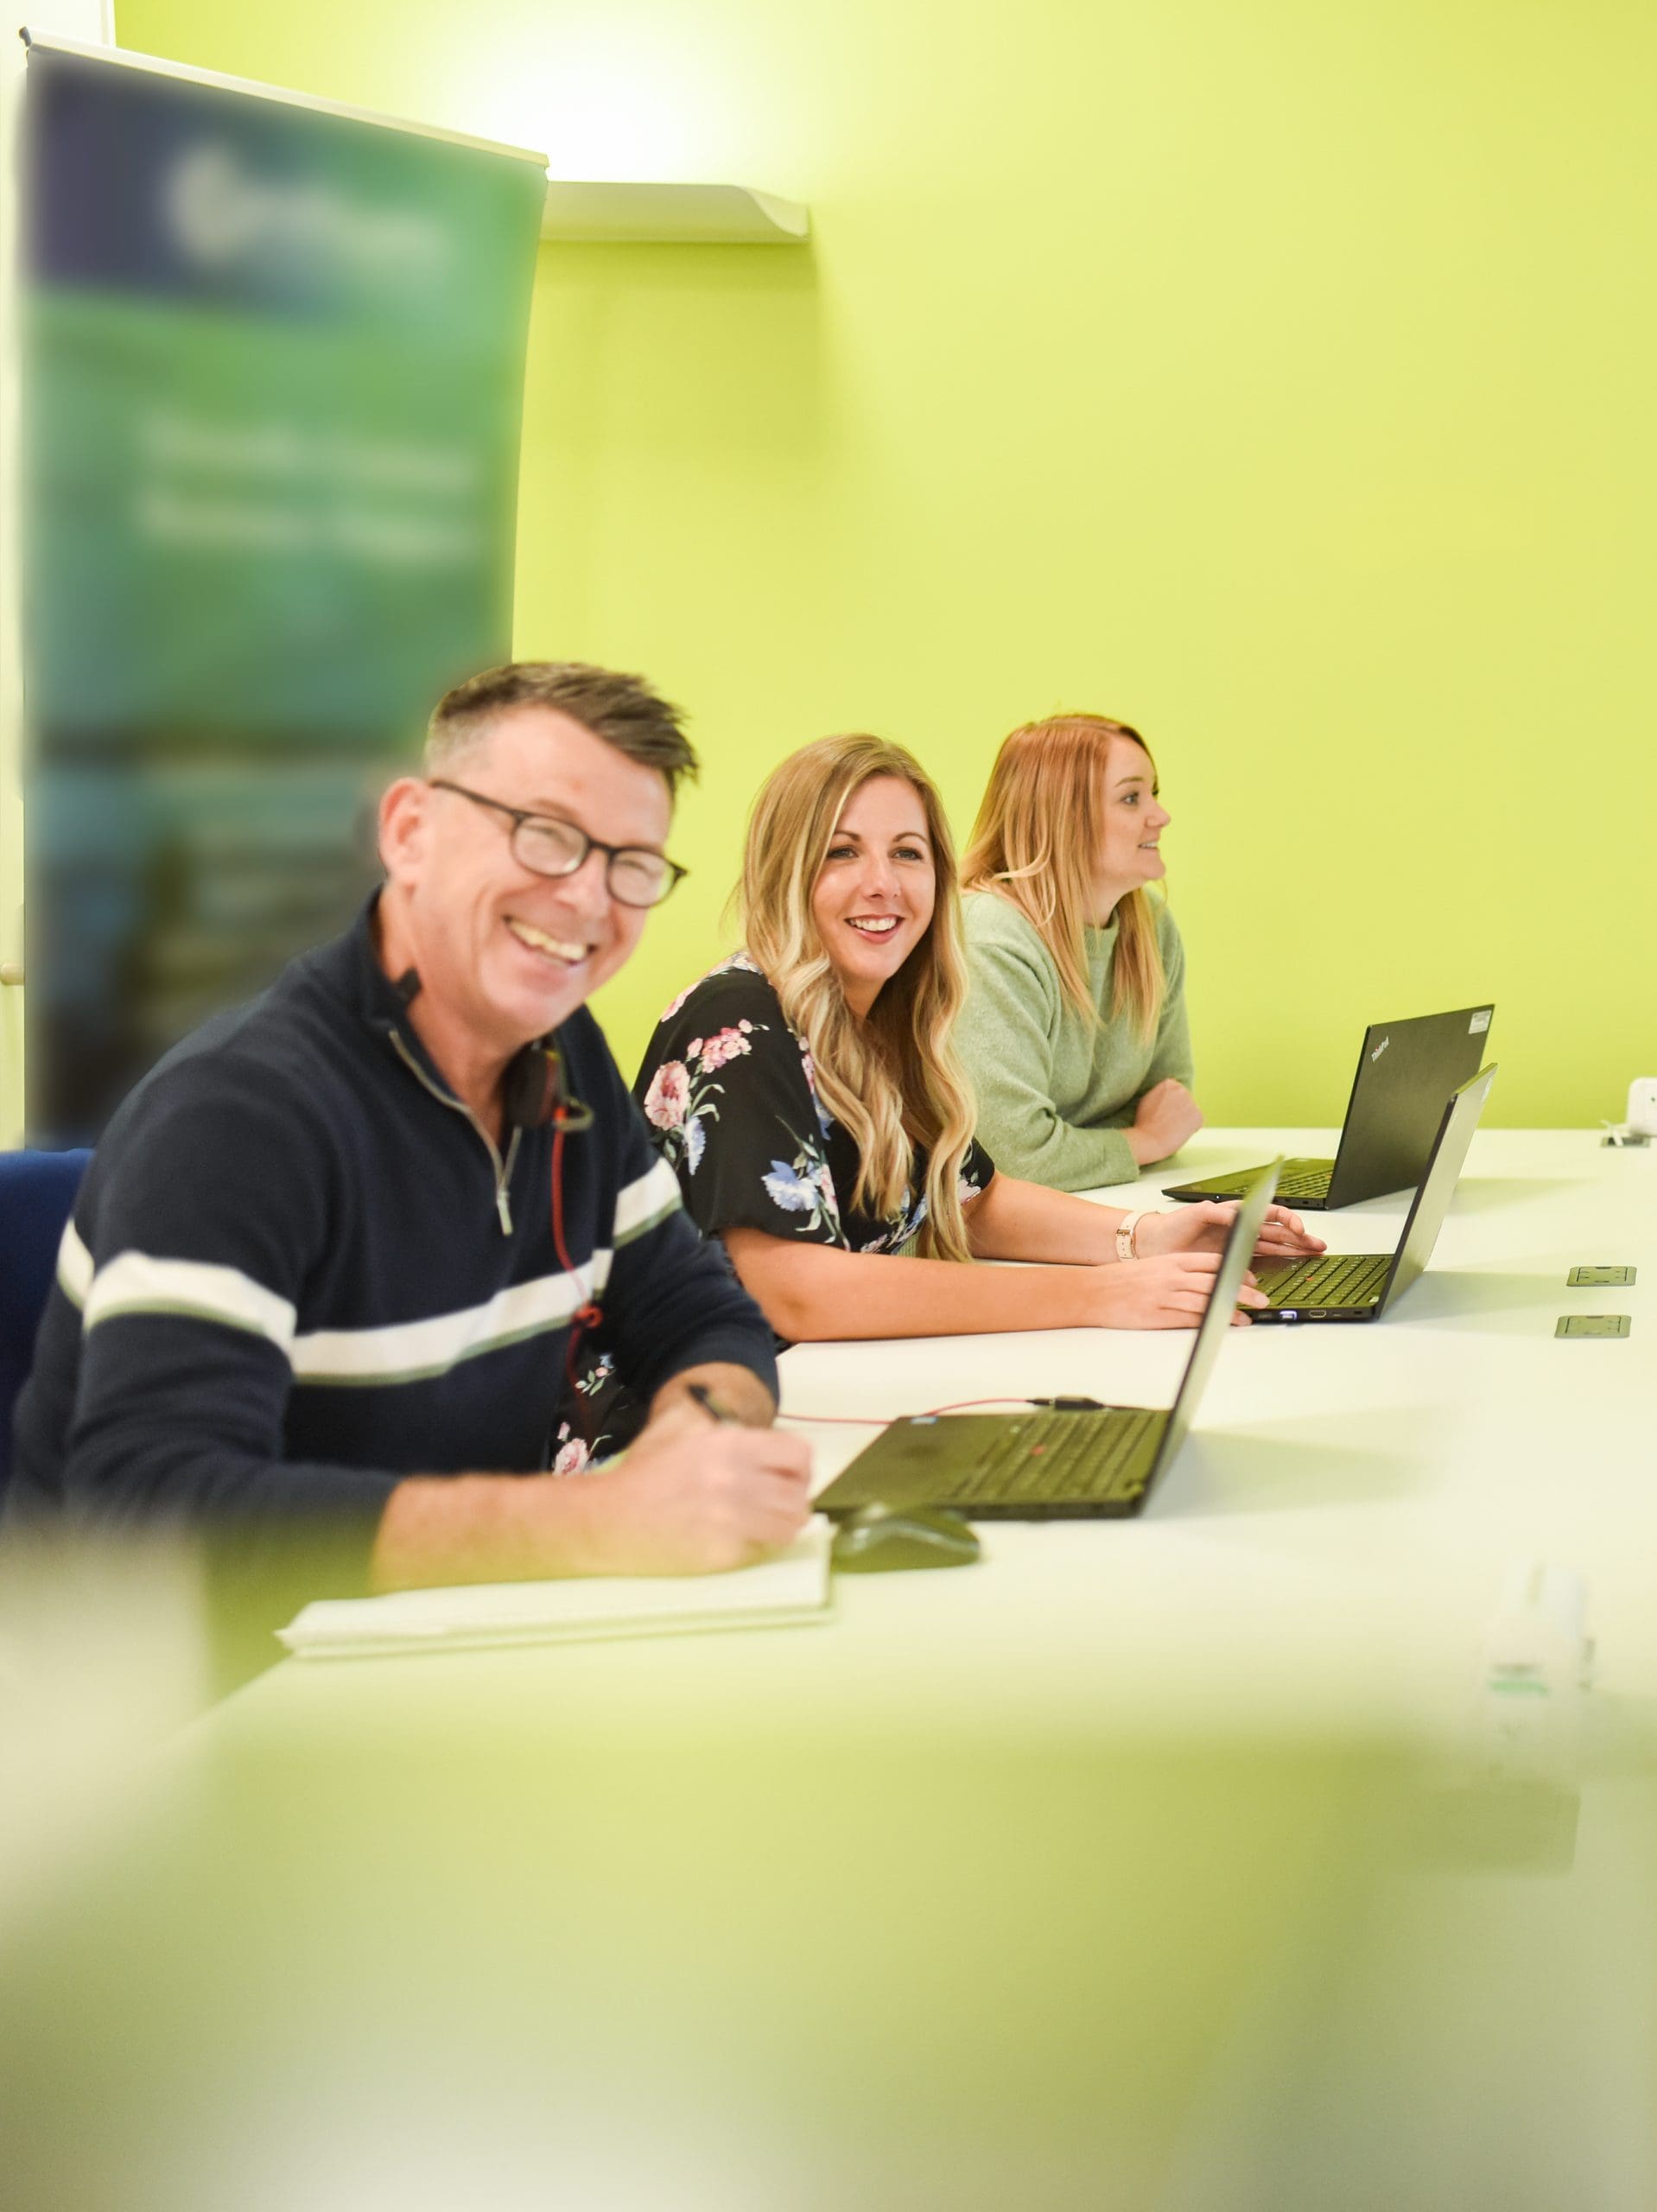 Photograph of 3 Cantium employees having a meeting with laptops while smiling off camera.